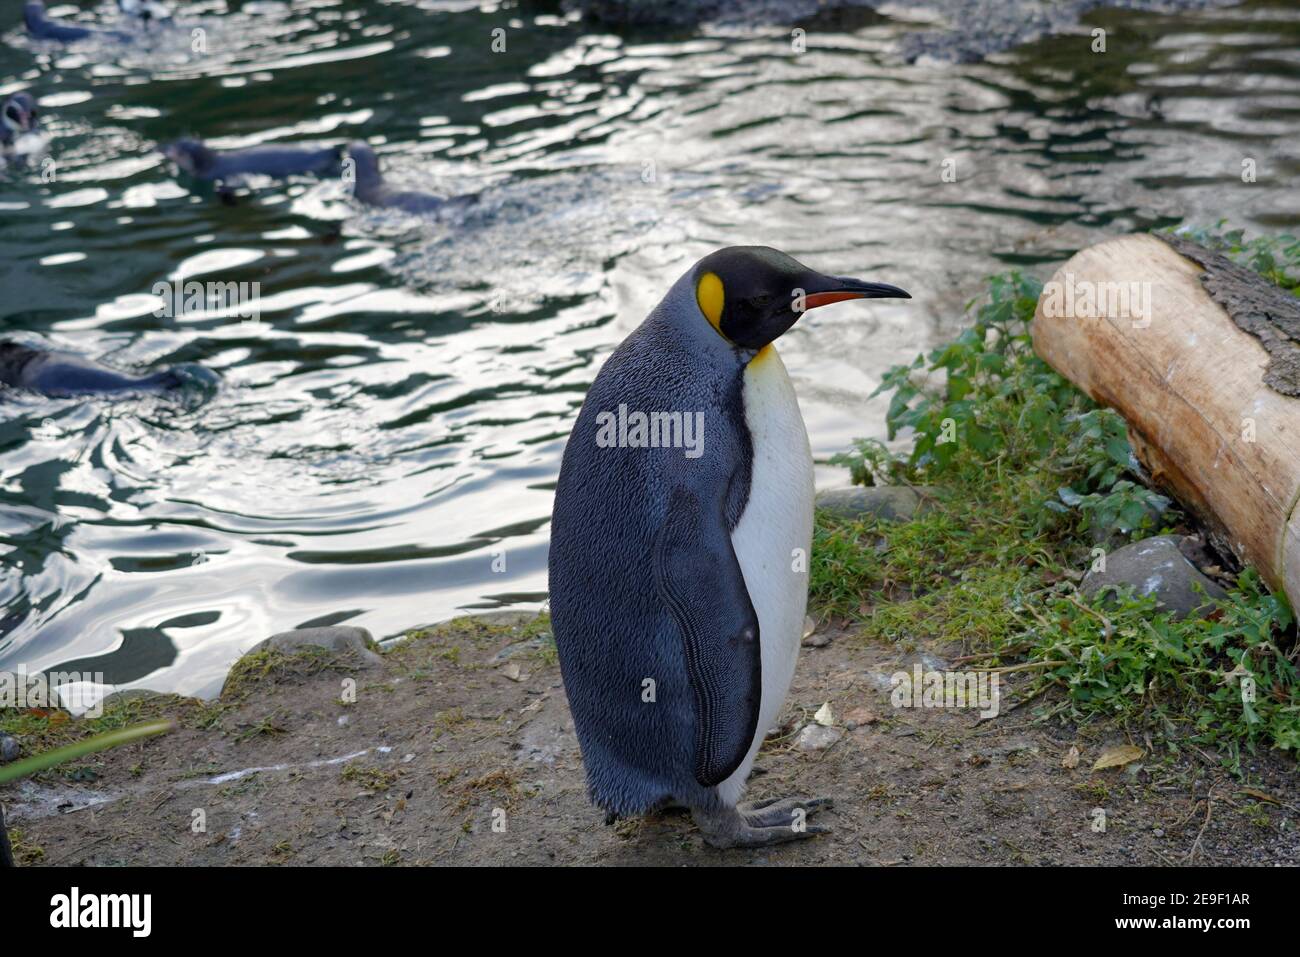 King penguin, in Latin called Aptenodytes patagonicus, in lateral view. He is standing on a bank of a small pond in the enclosure. Stock Photo